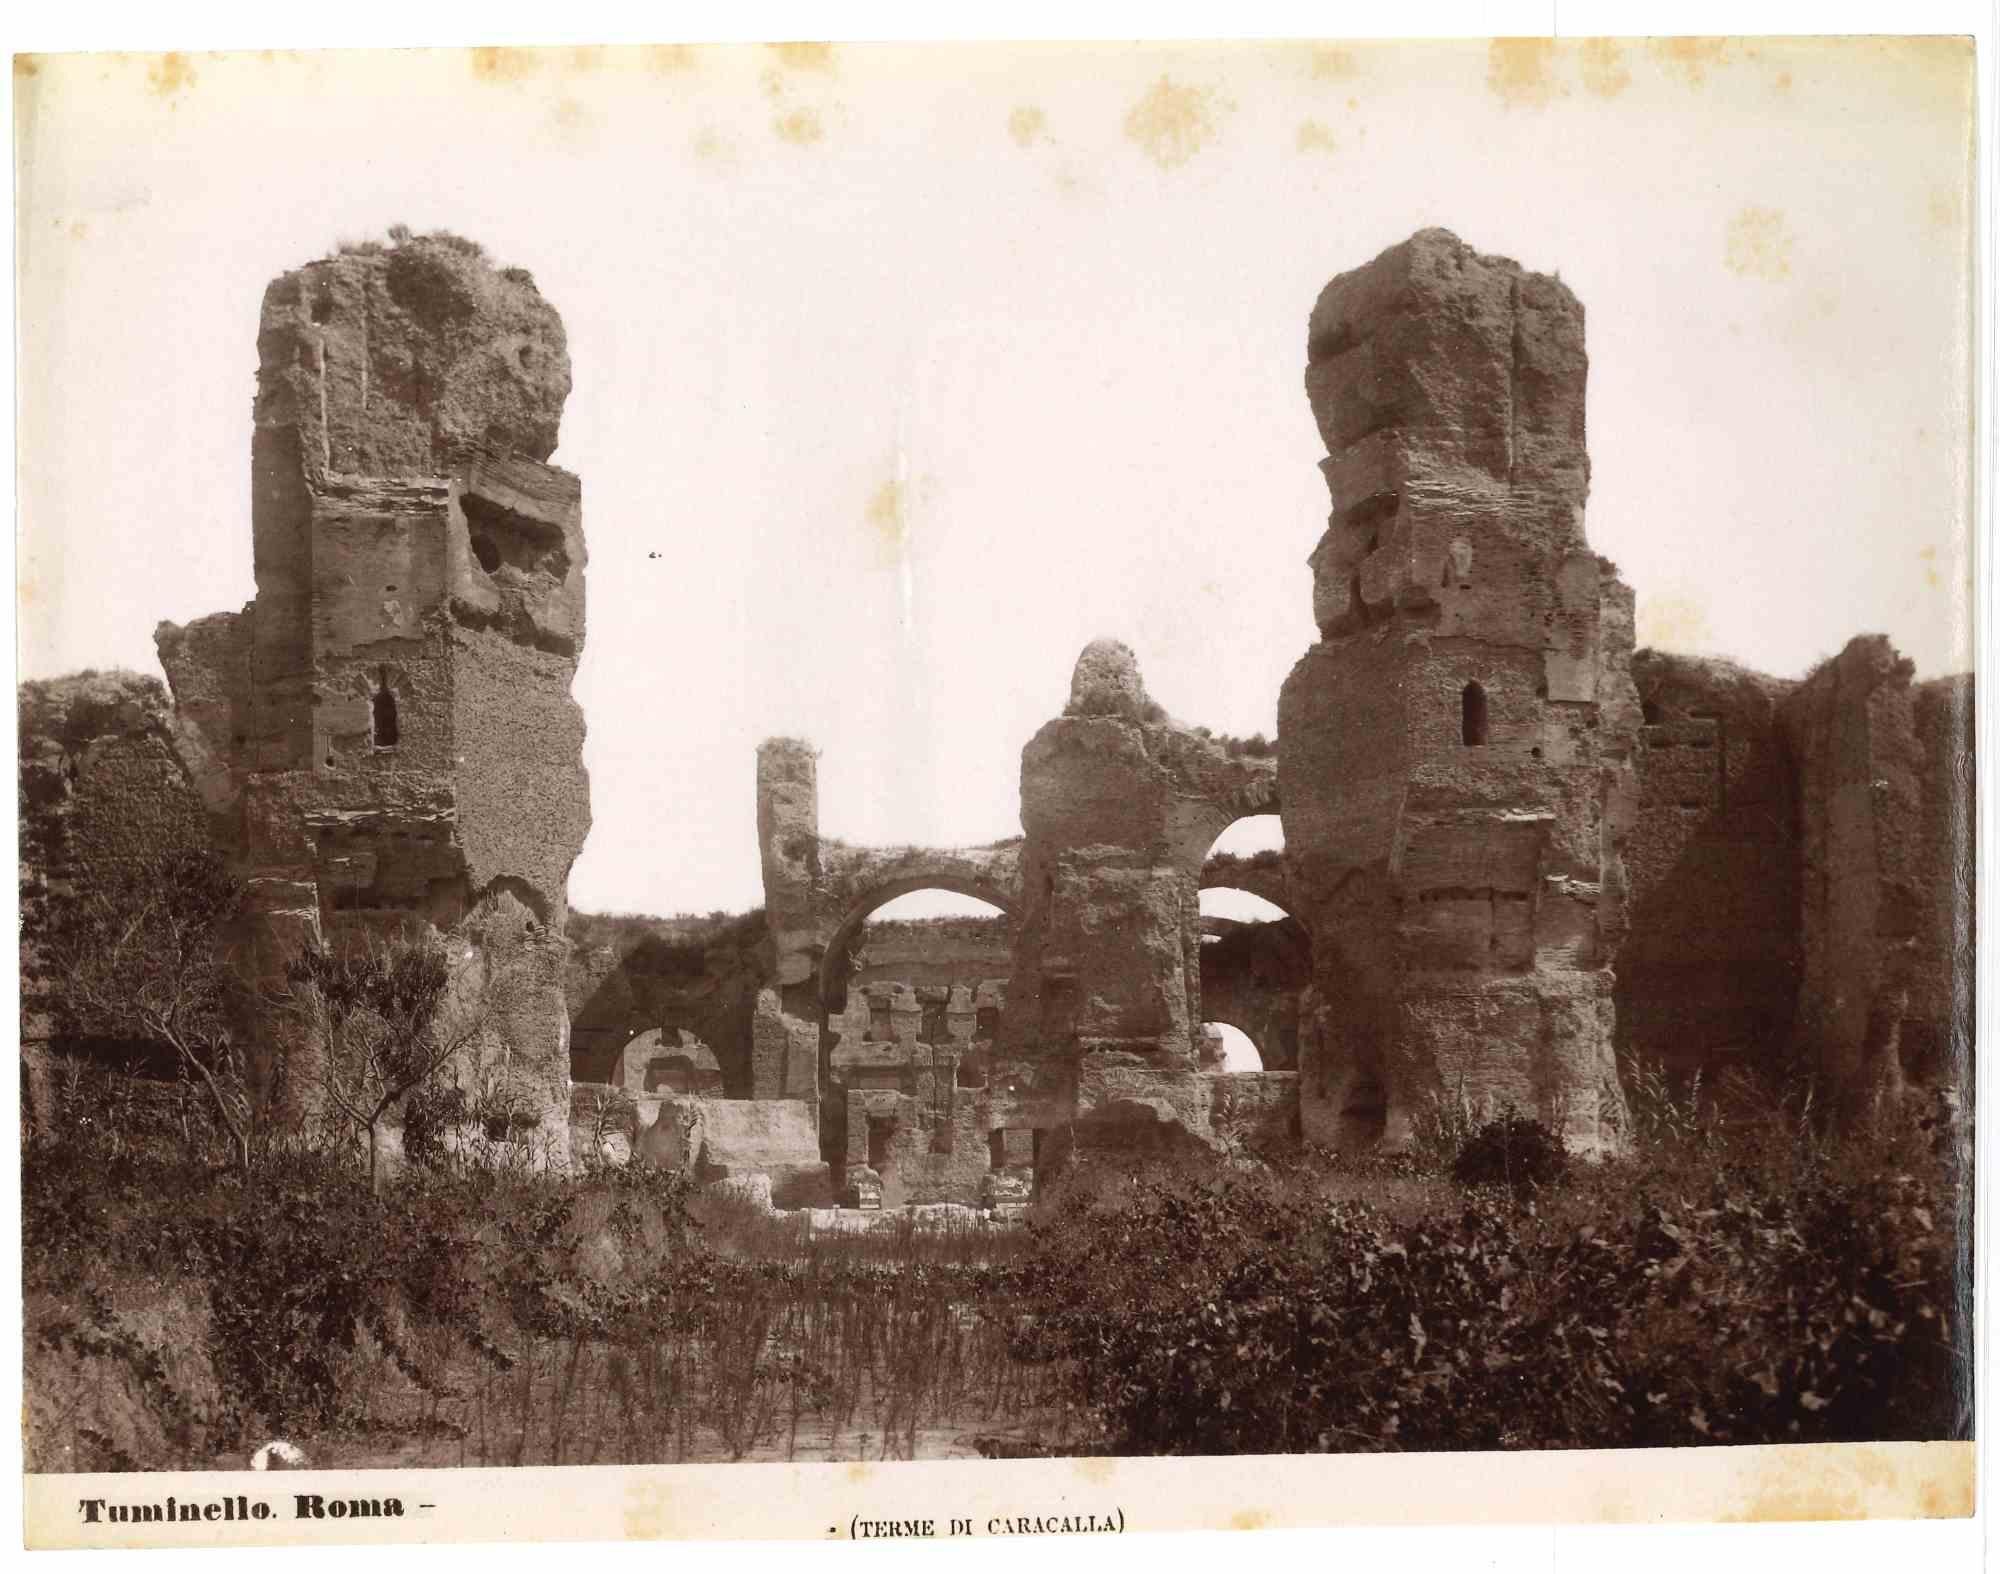 Baths of Caracalla is a vintage photograph realized by Ludovico Tuminello in the early 20th Century.

Titled on the lower.

Good conditions except for some foxing.